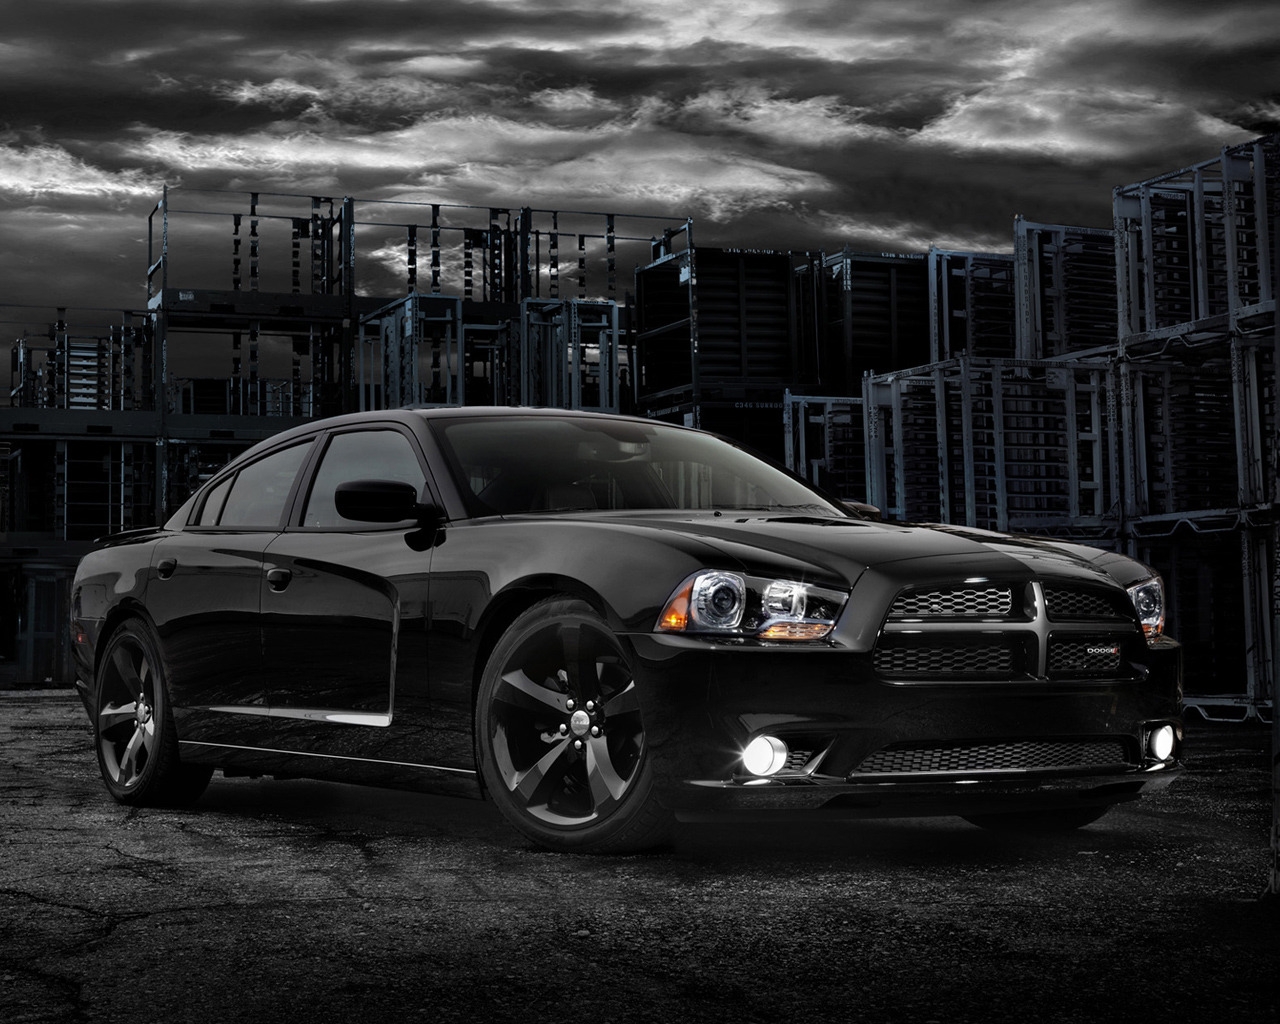 2012 Dodge Charger Blacktop for 1280 x 1024 resolution